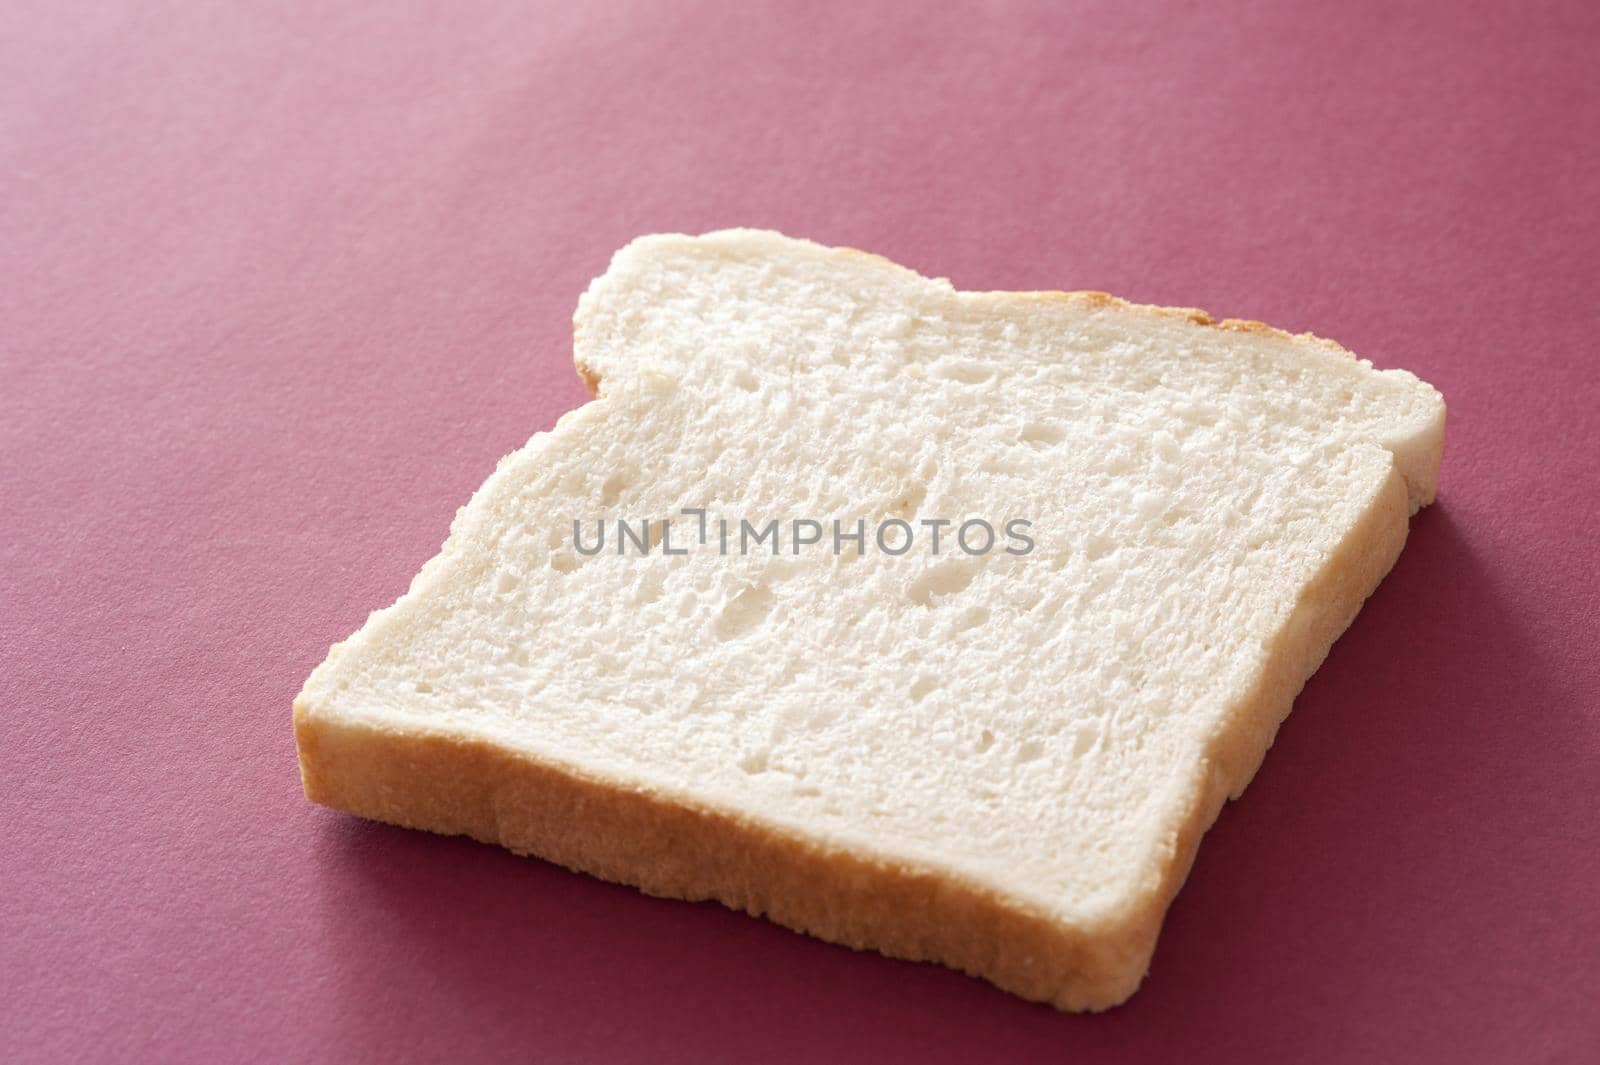 Slice of plain fresh white bread on a maroon background viewed low angle with copyspace